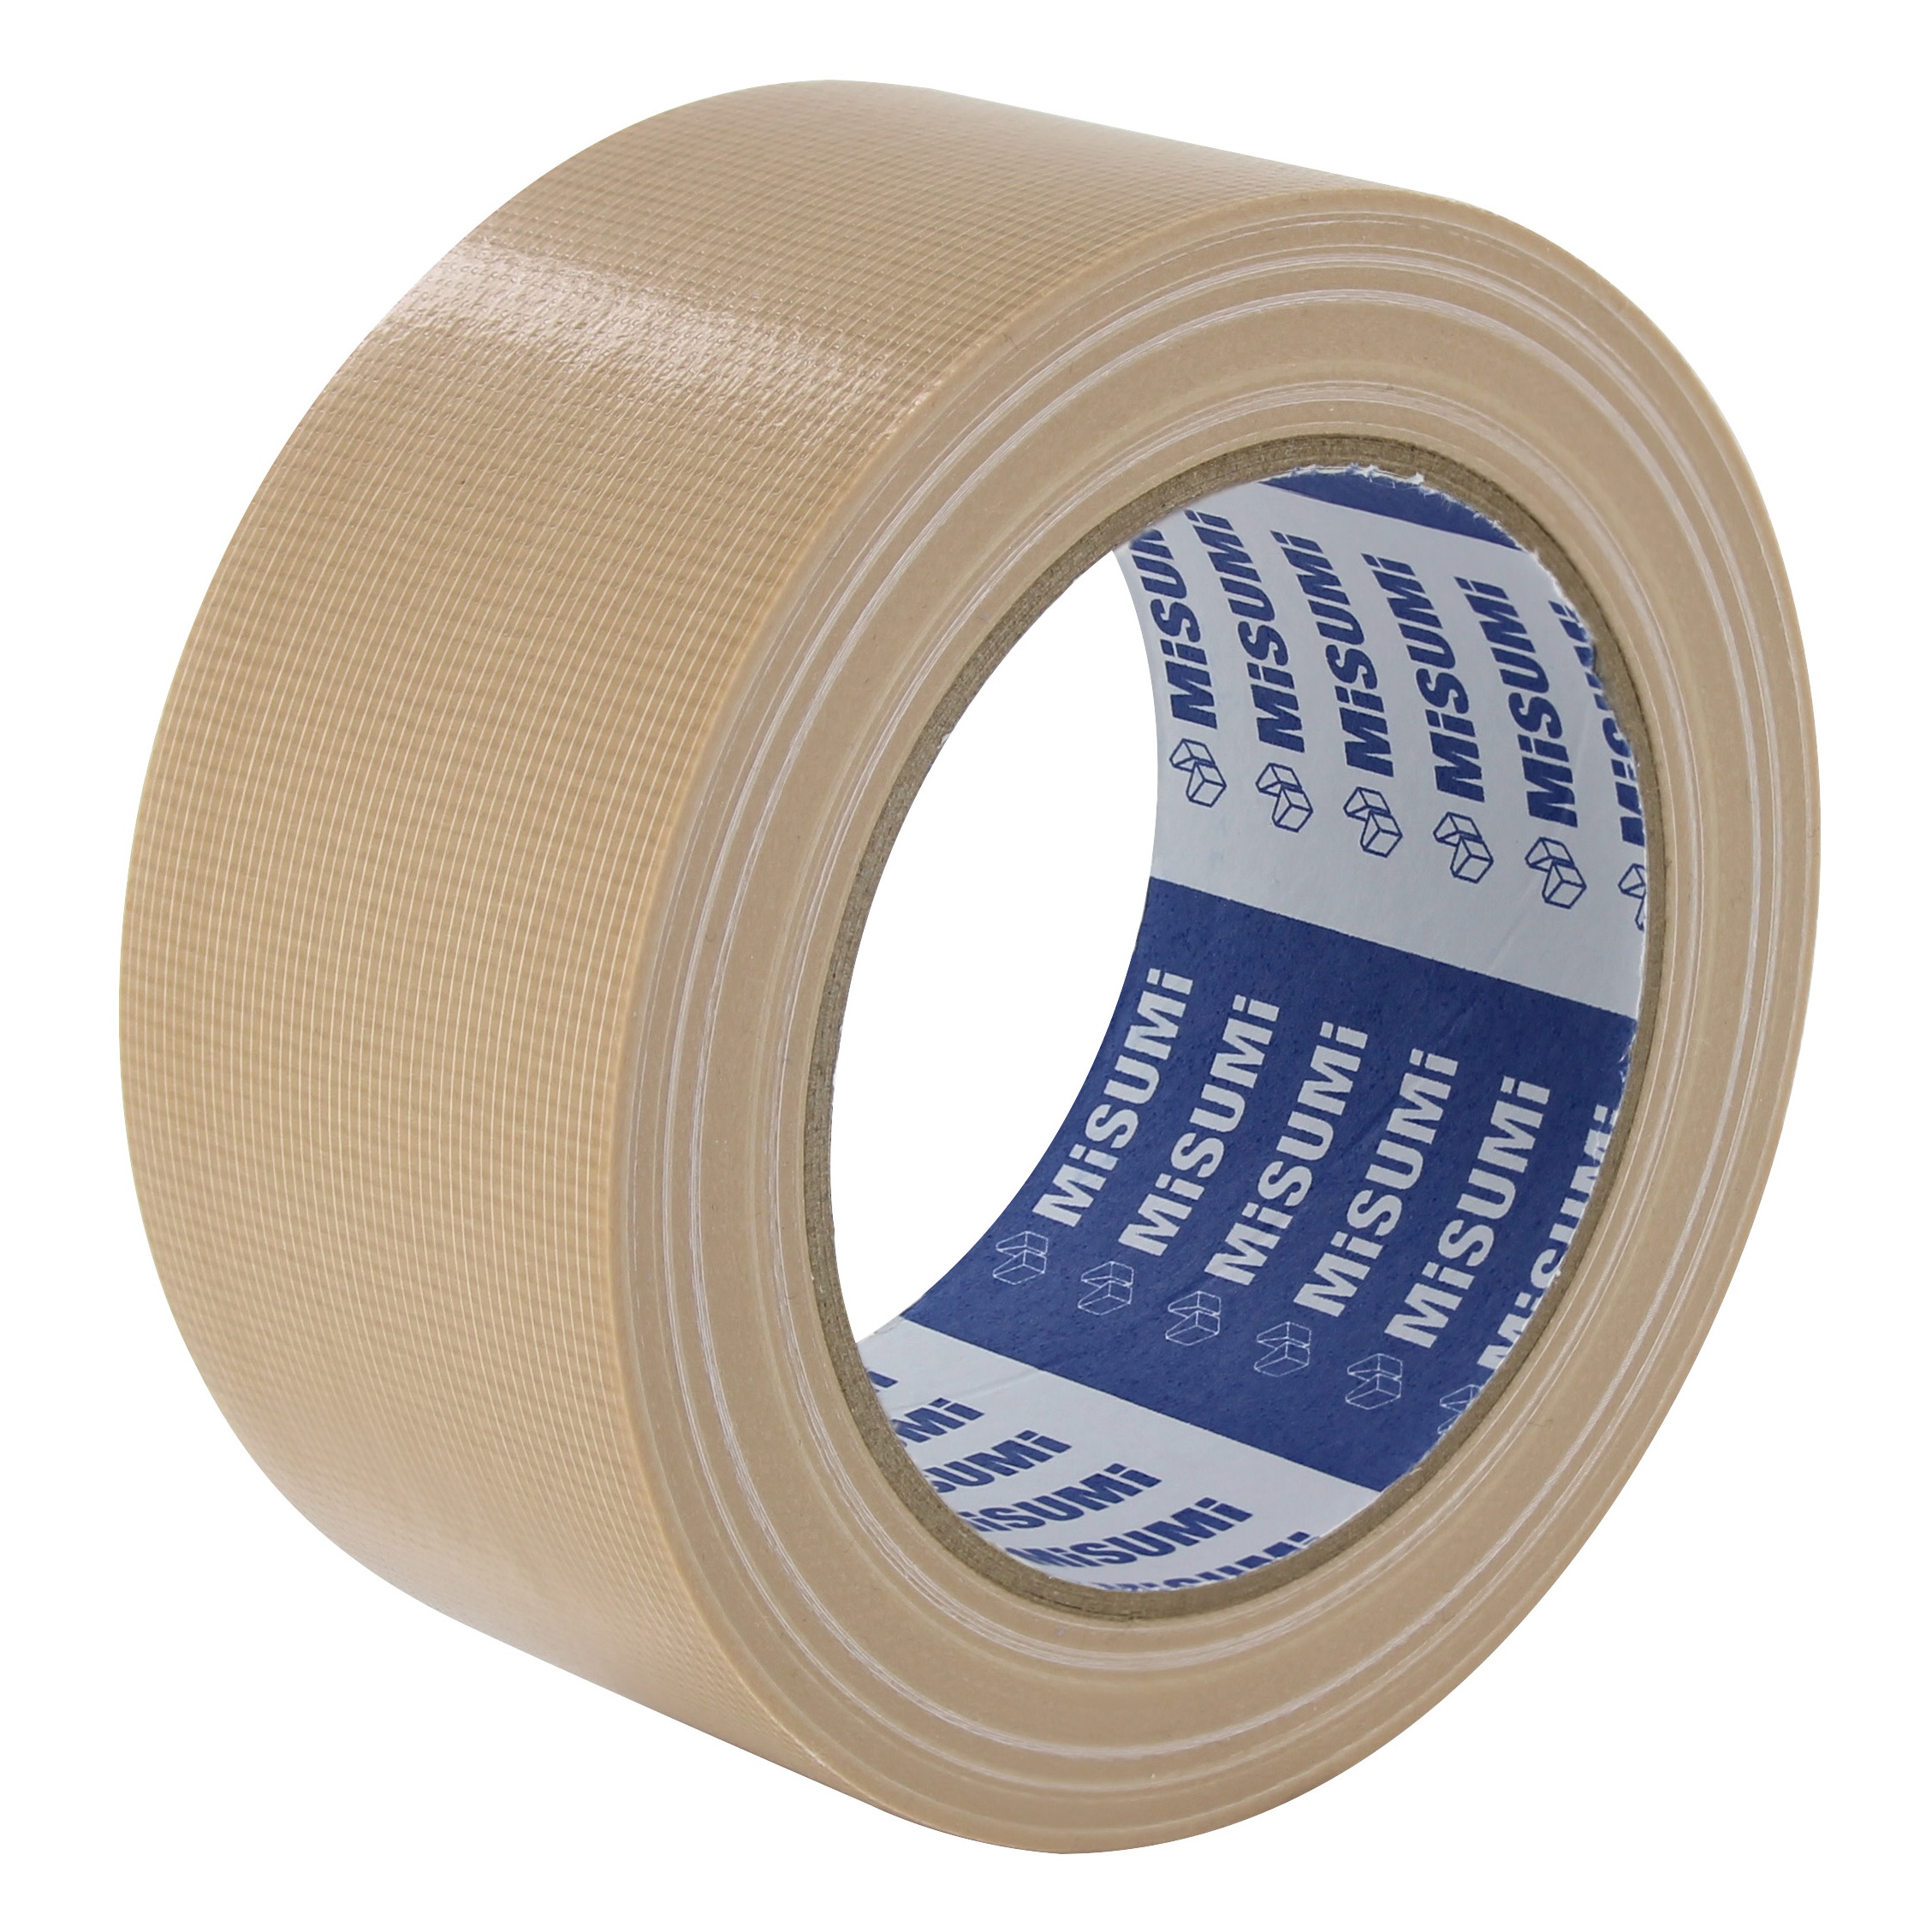 White Permacel Nitto x 36 yds. P-02 Double Coated Kraft Paper Tape: 3 in 